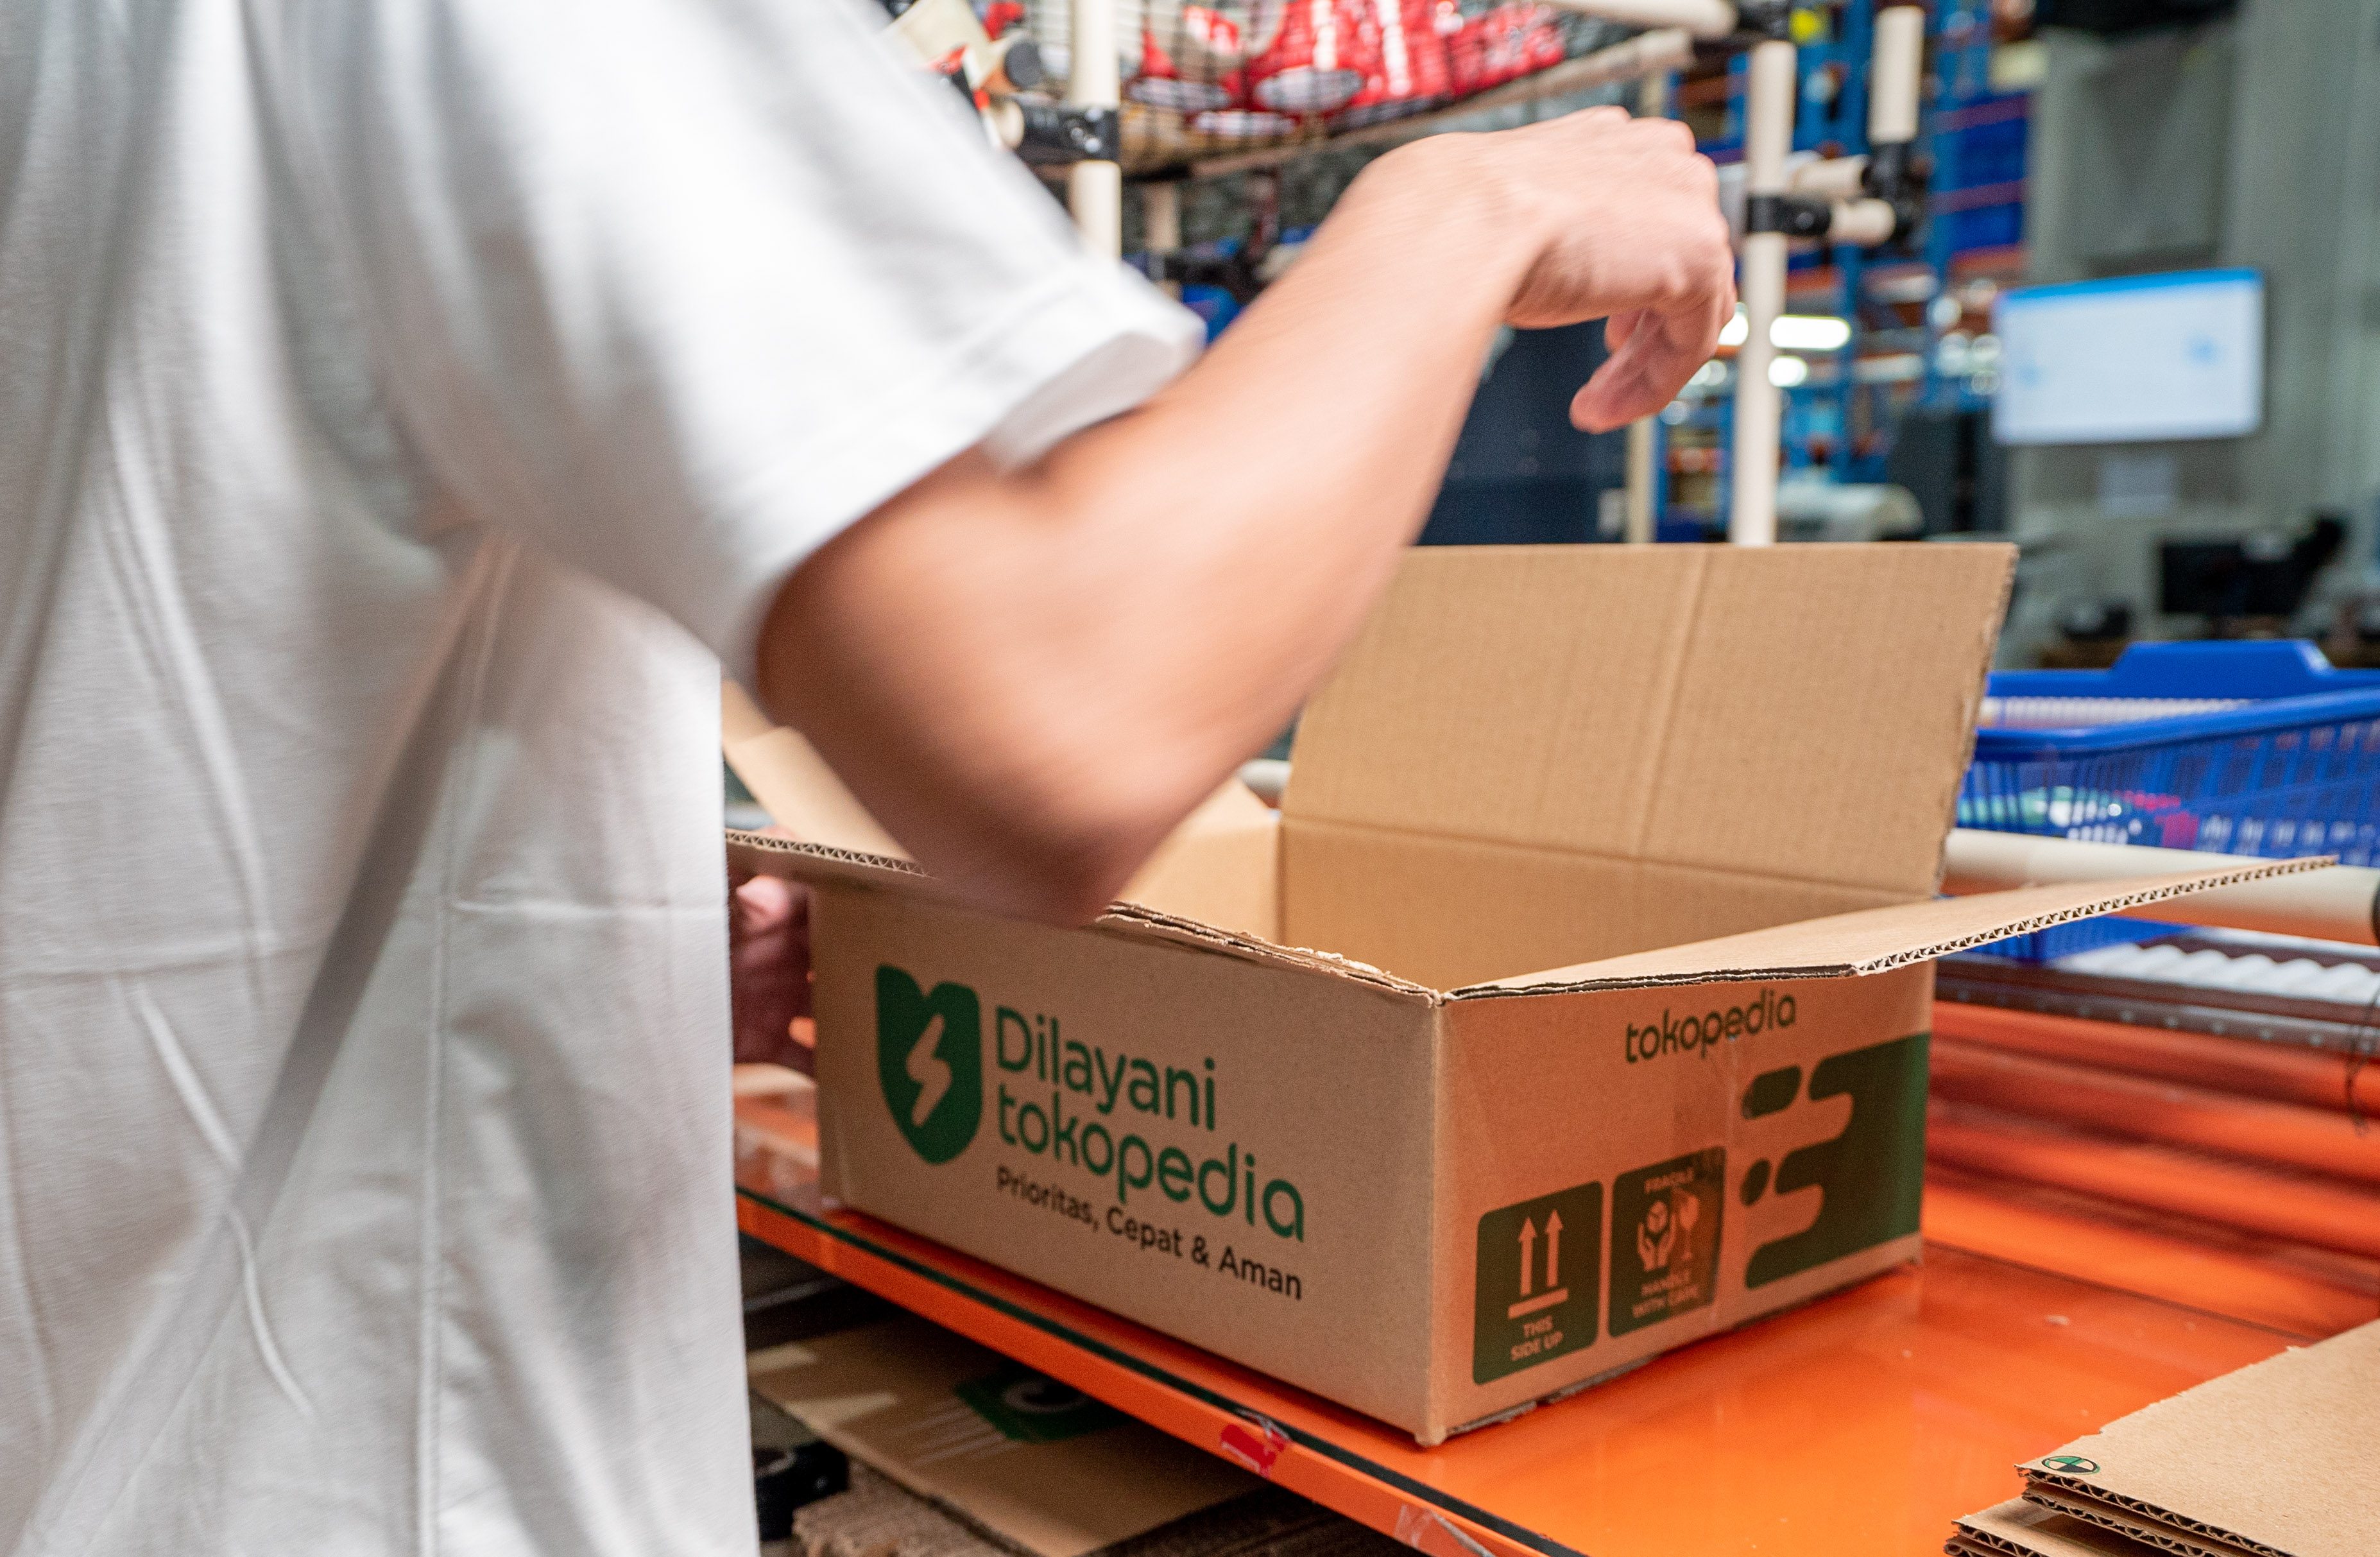 Indonesia’s Tokopedia injects $1.2m to local fulfillment subsidiary